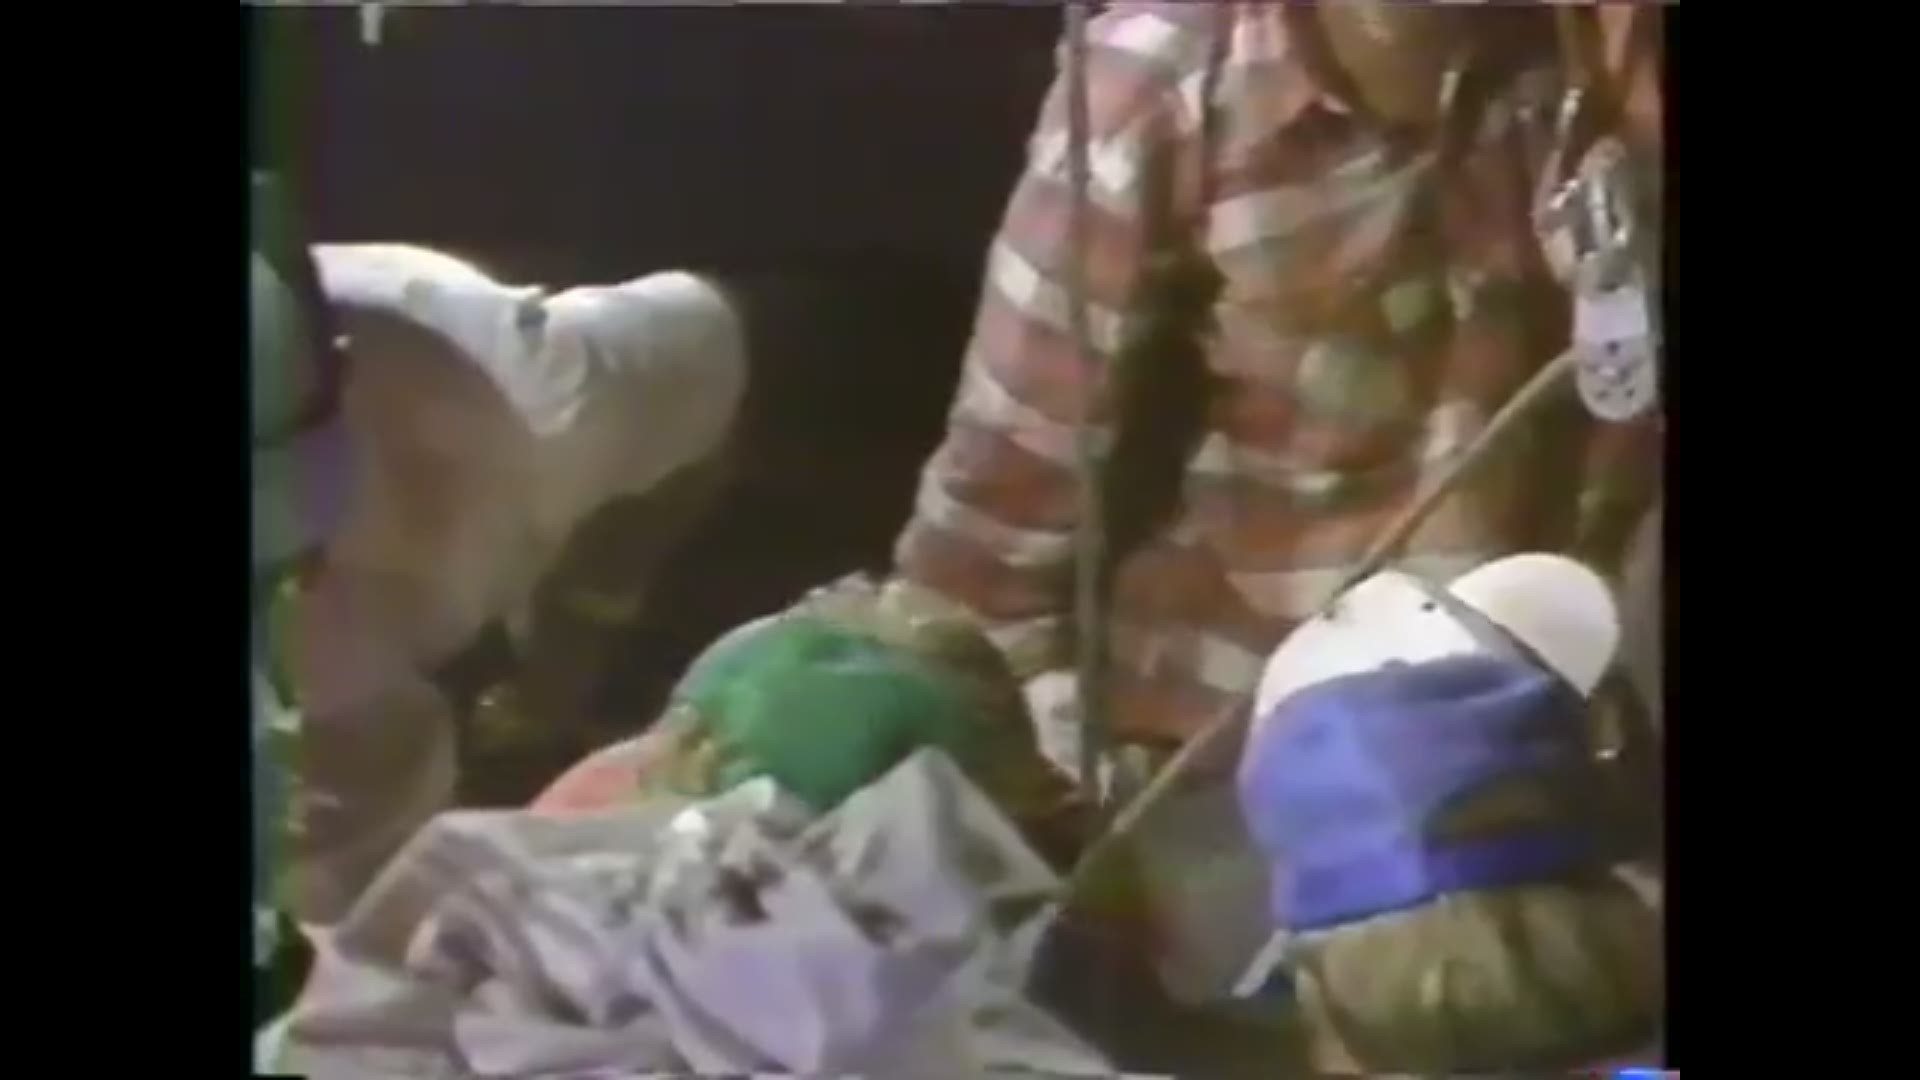 Watch WFAA's Dave Cassidy and Tracy Rowlett cover the rescue of "Baby Jessica" from a well in Midland, Texas on Oct. 16, 1987.